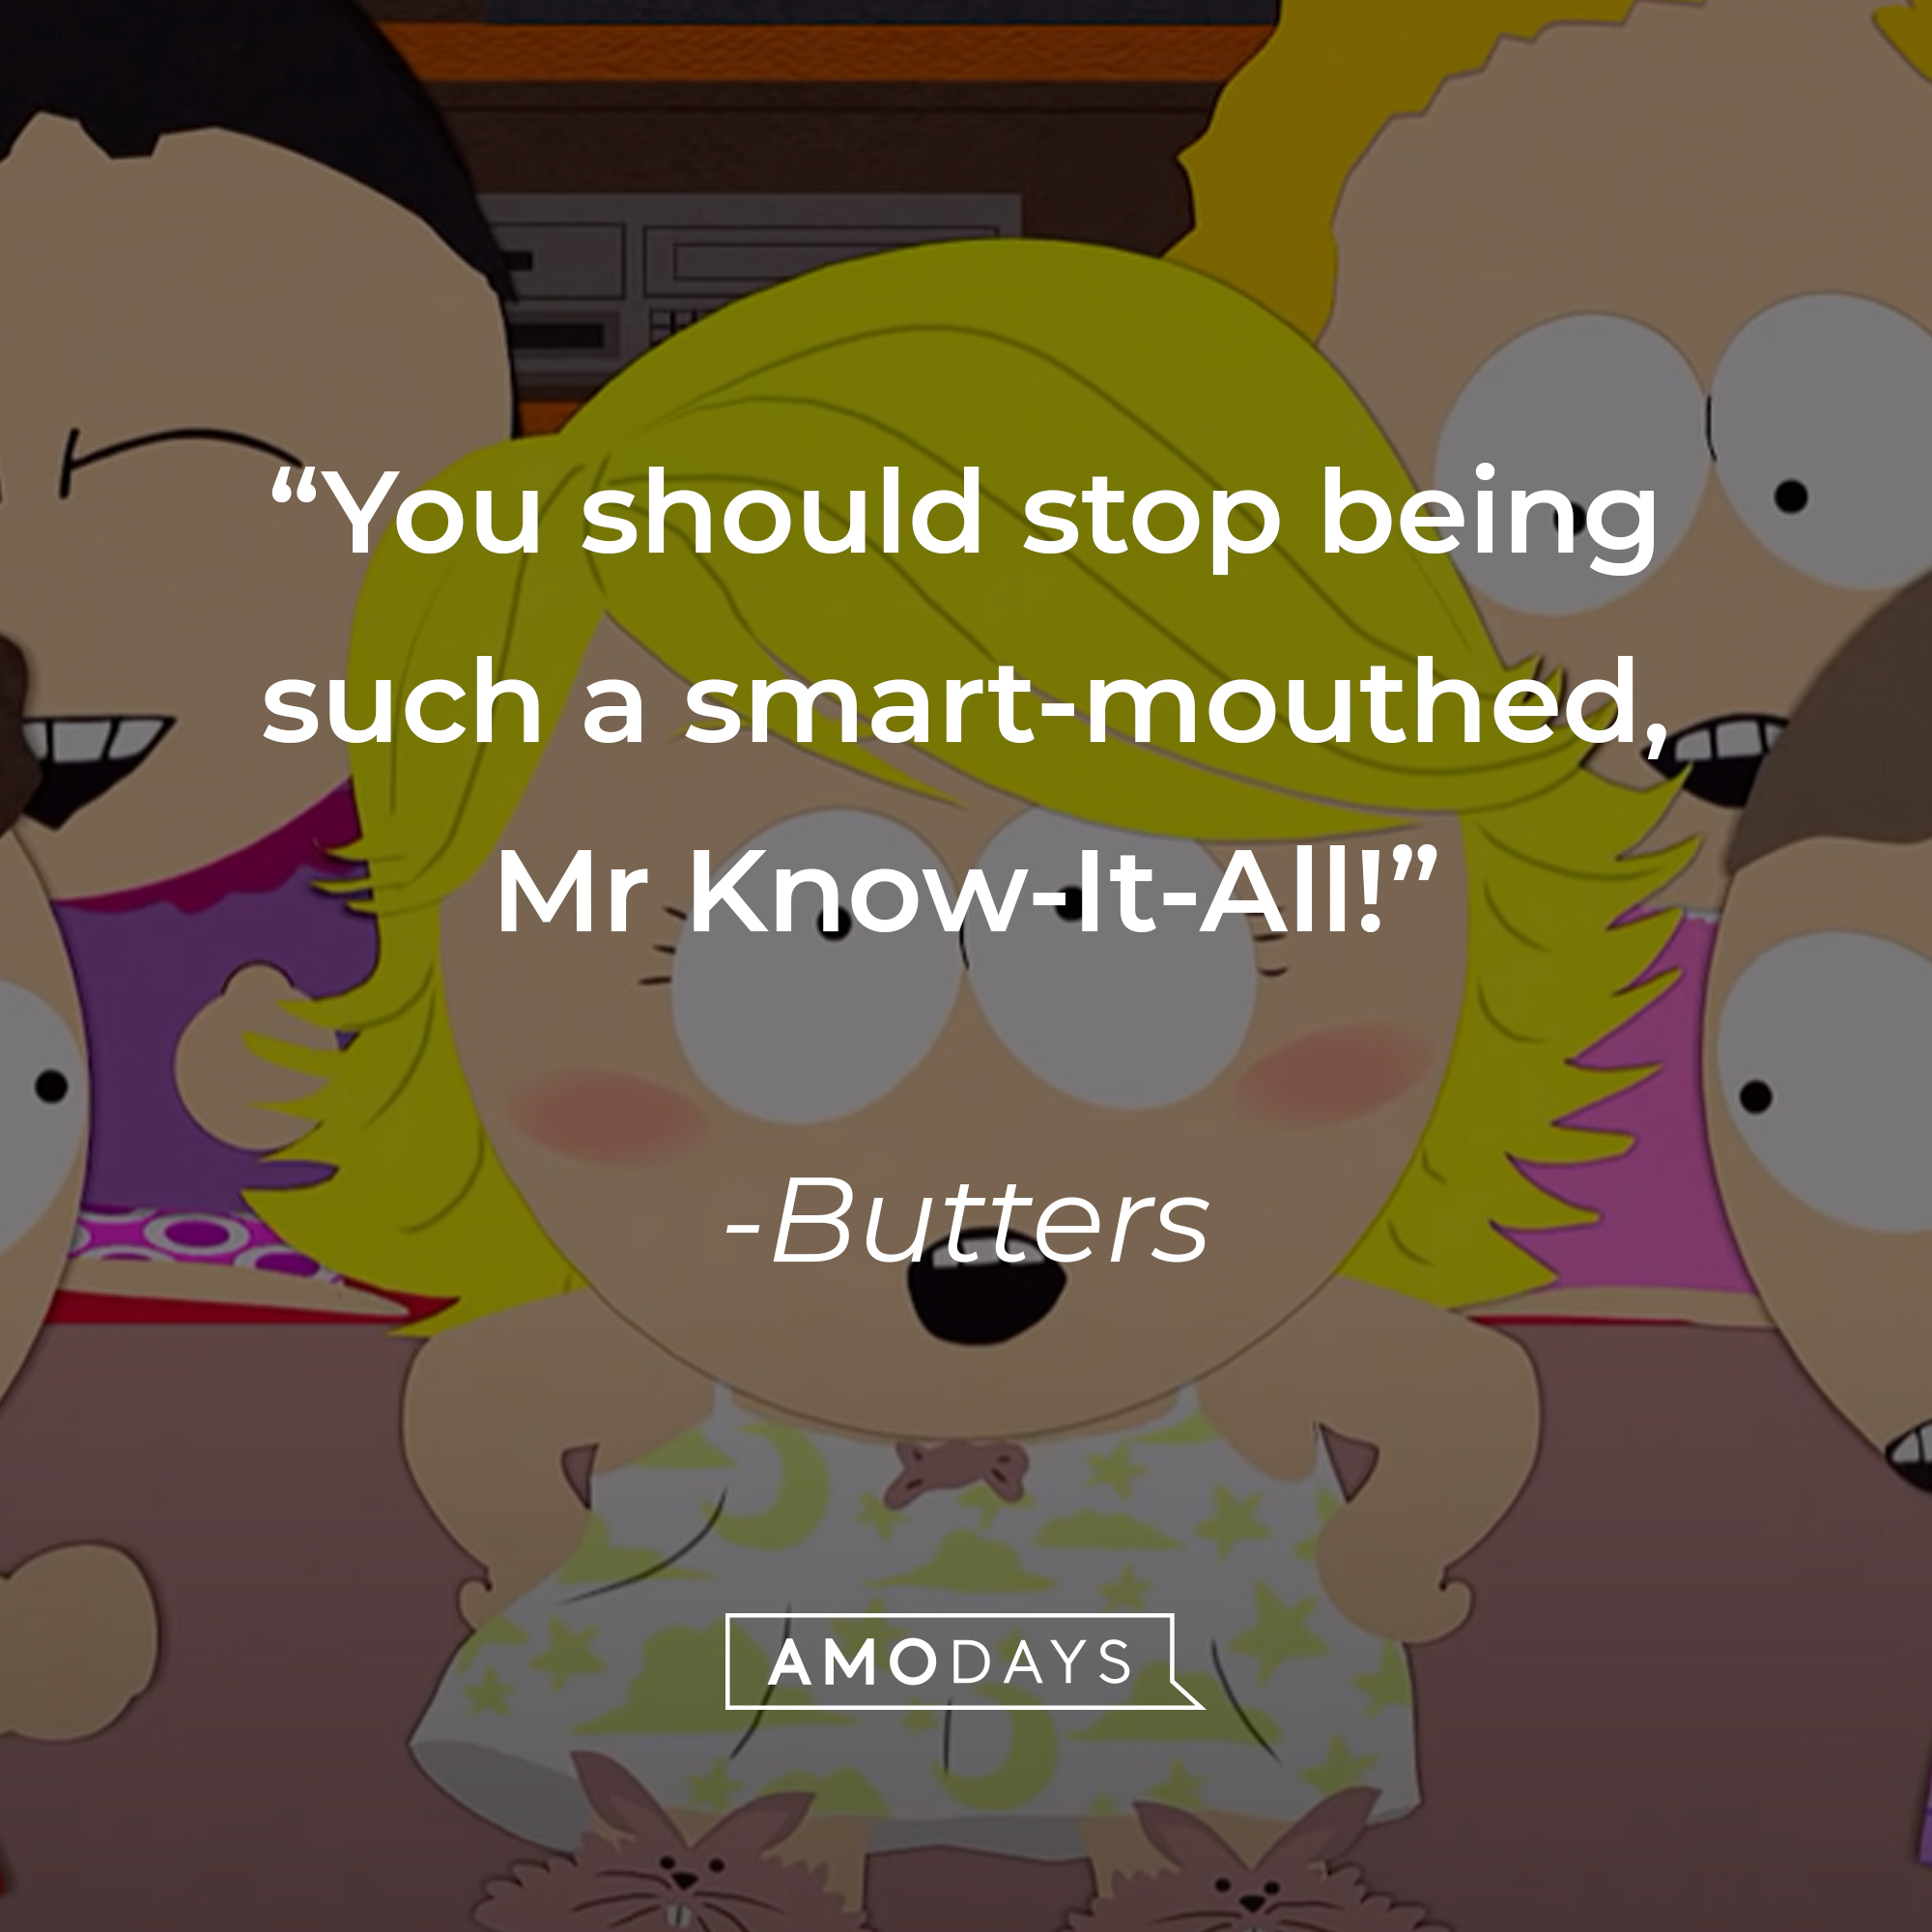 Butters' quote: "You should stop being such a smart-mouthed, Mr Know-It-All." | Source: youtube.com/southpark